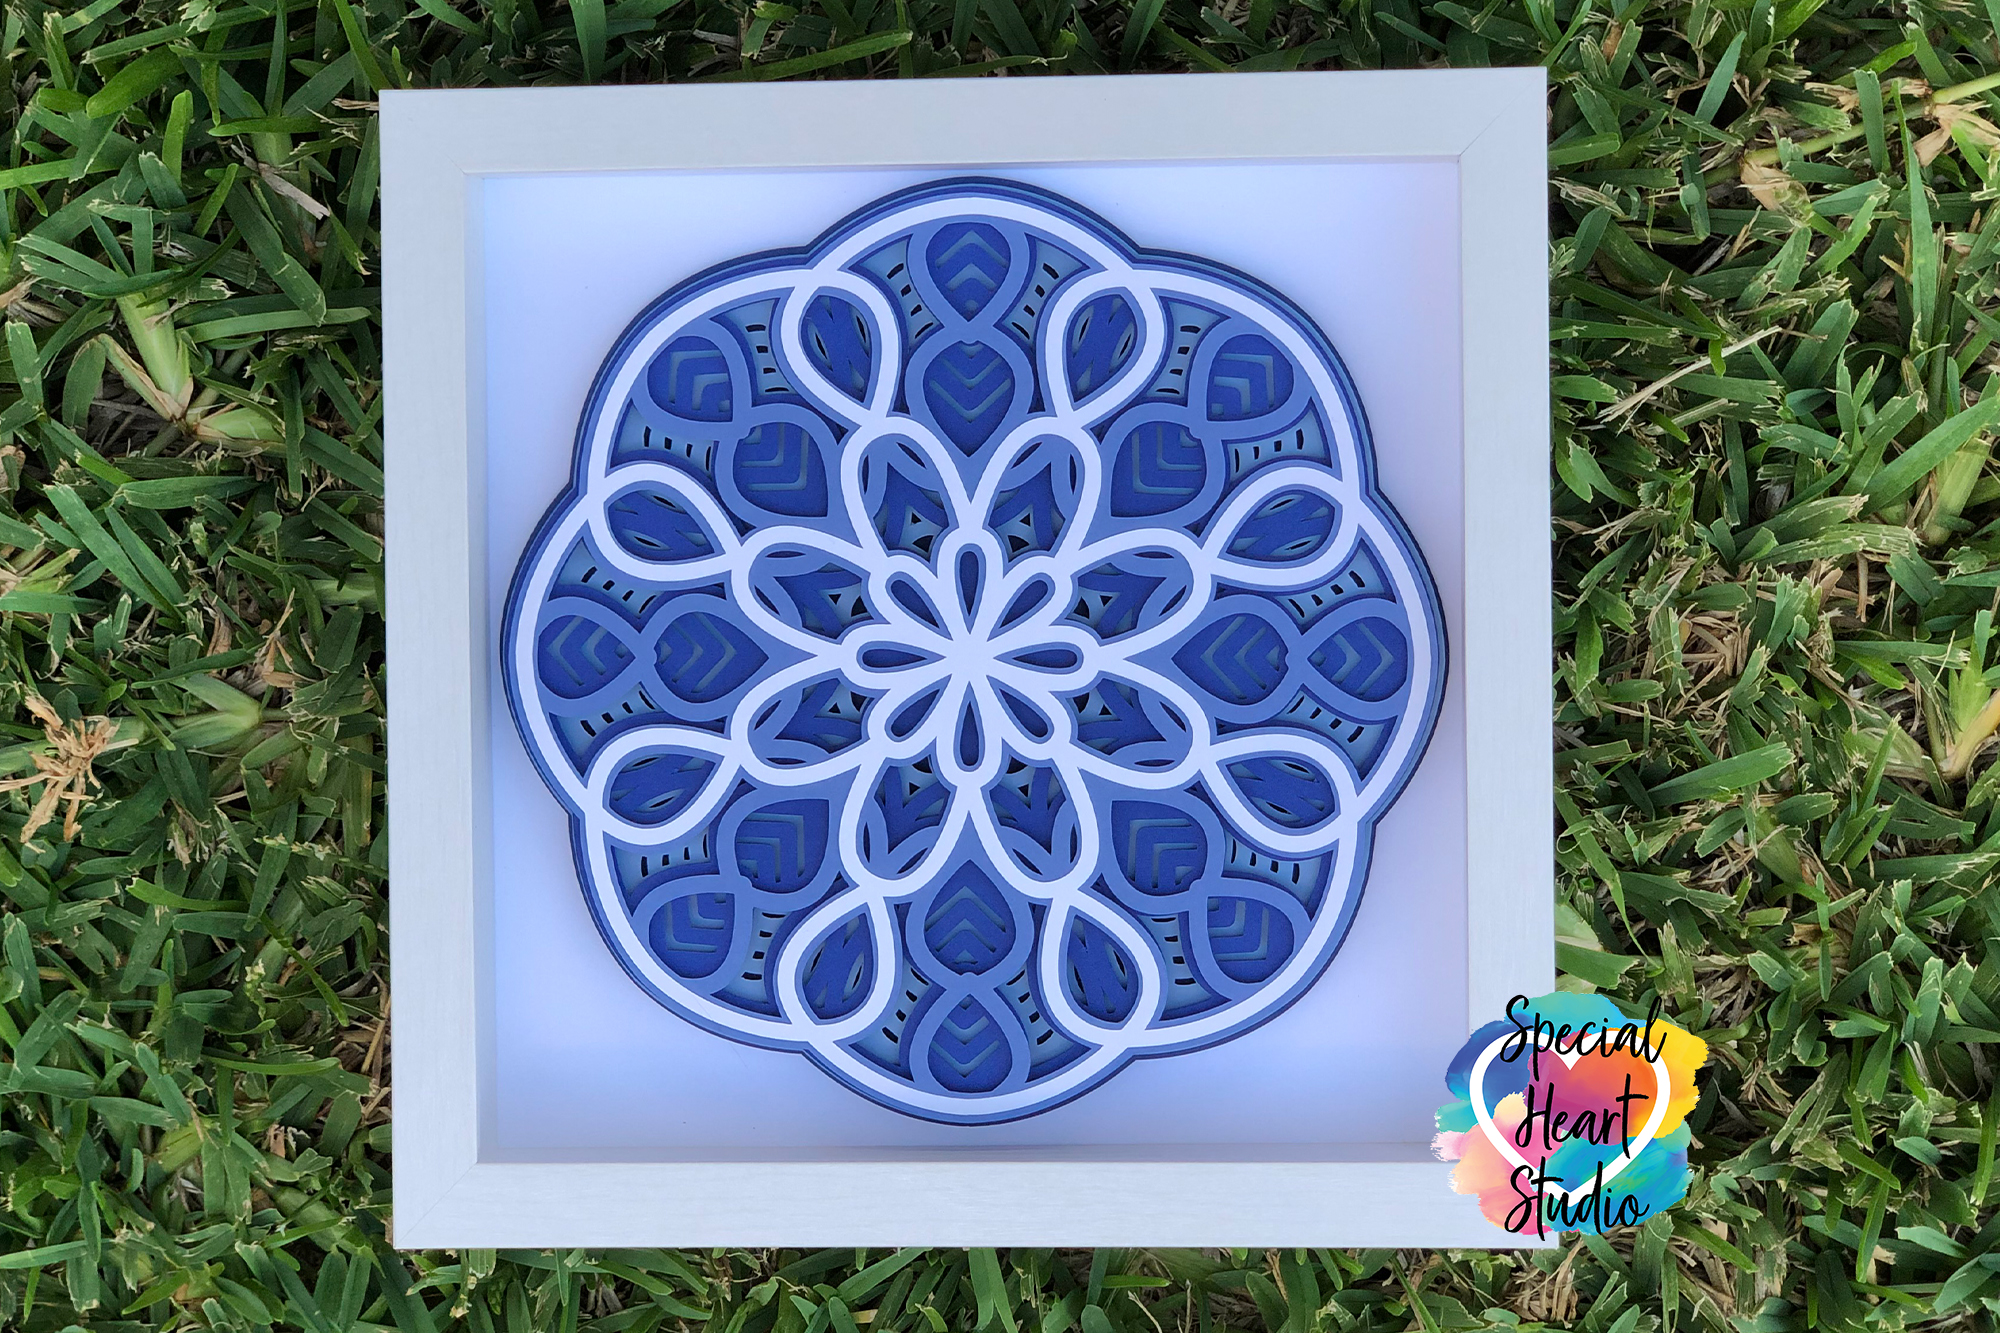 Download Special Heart Studio 3D Mandala - My Designs In the Chaos